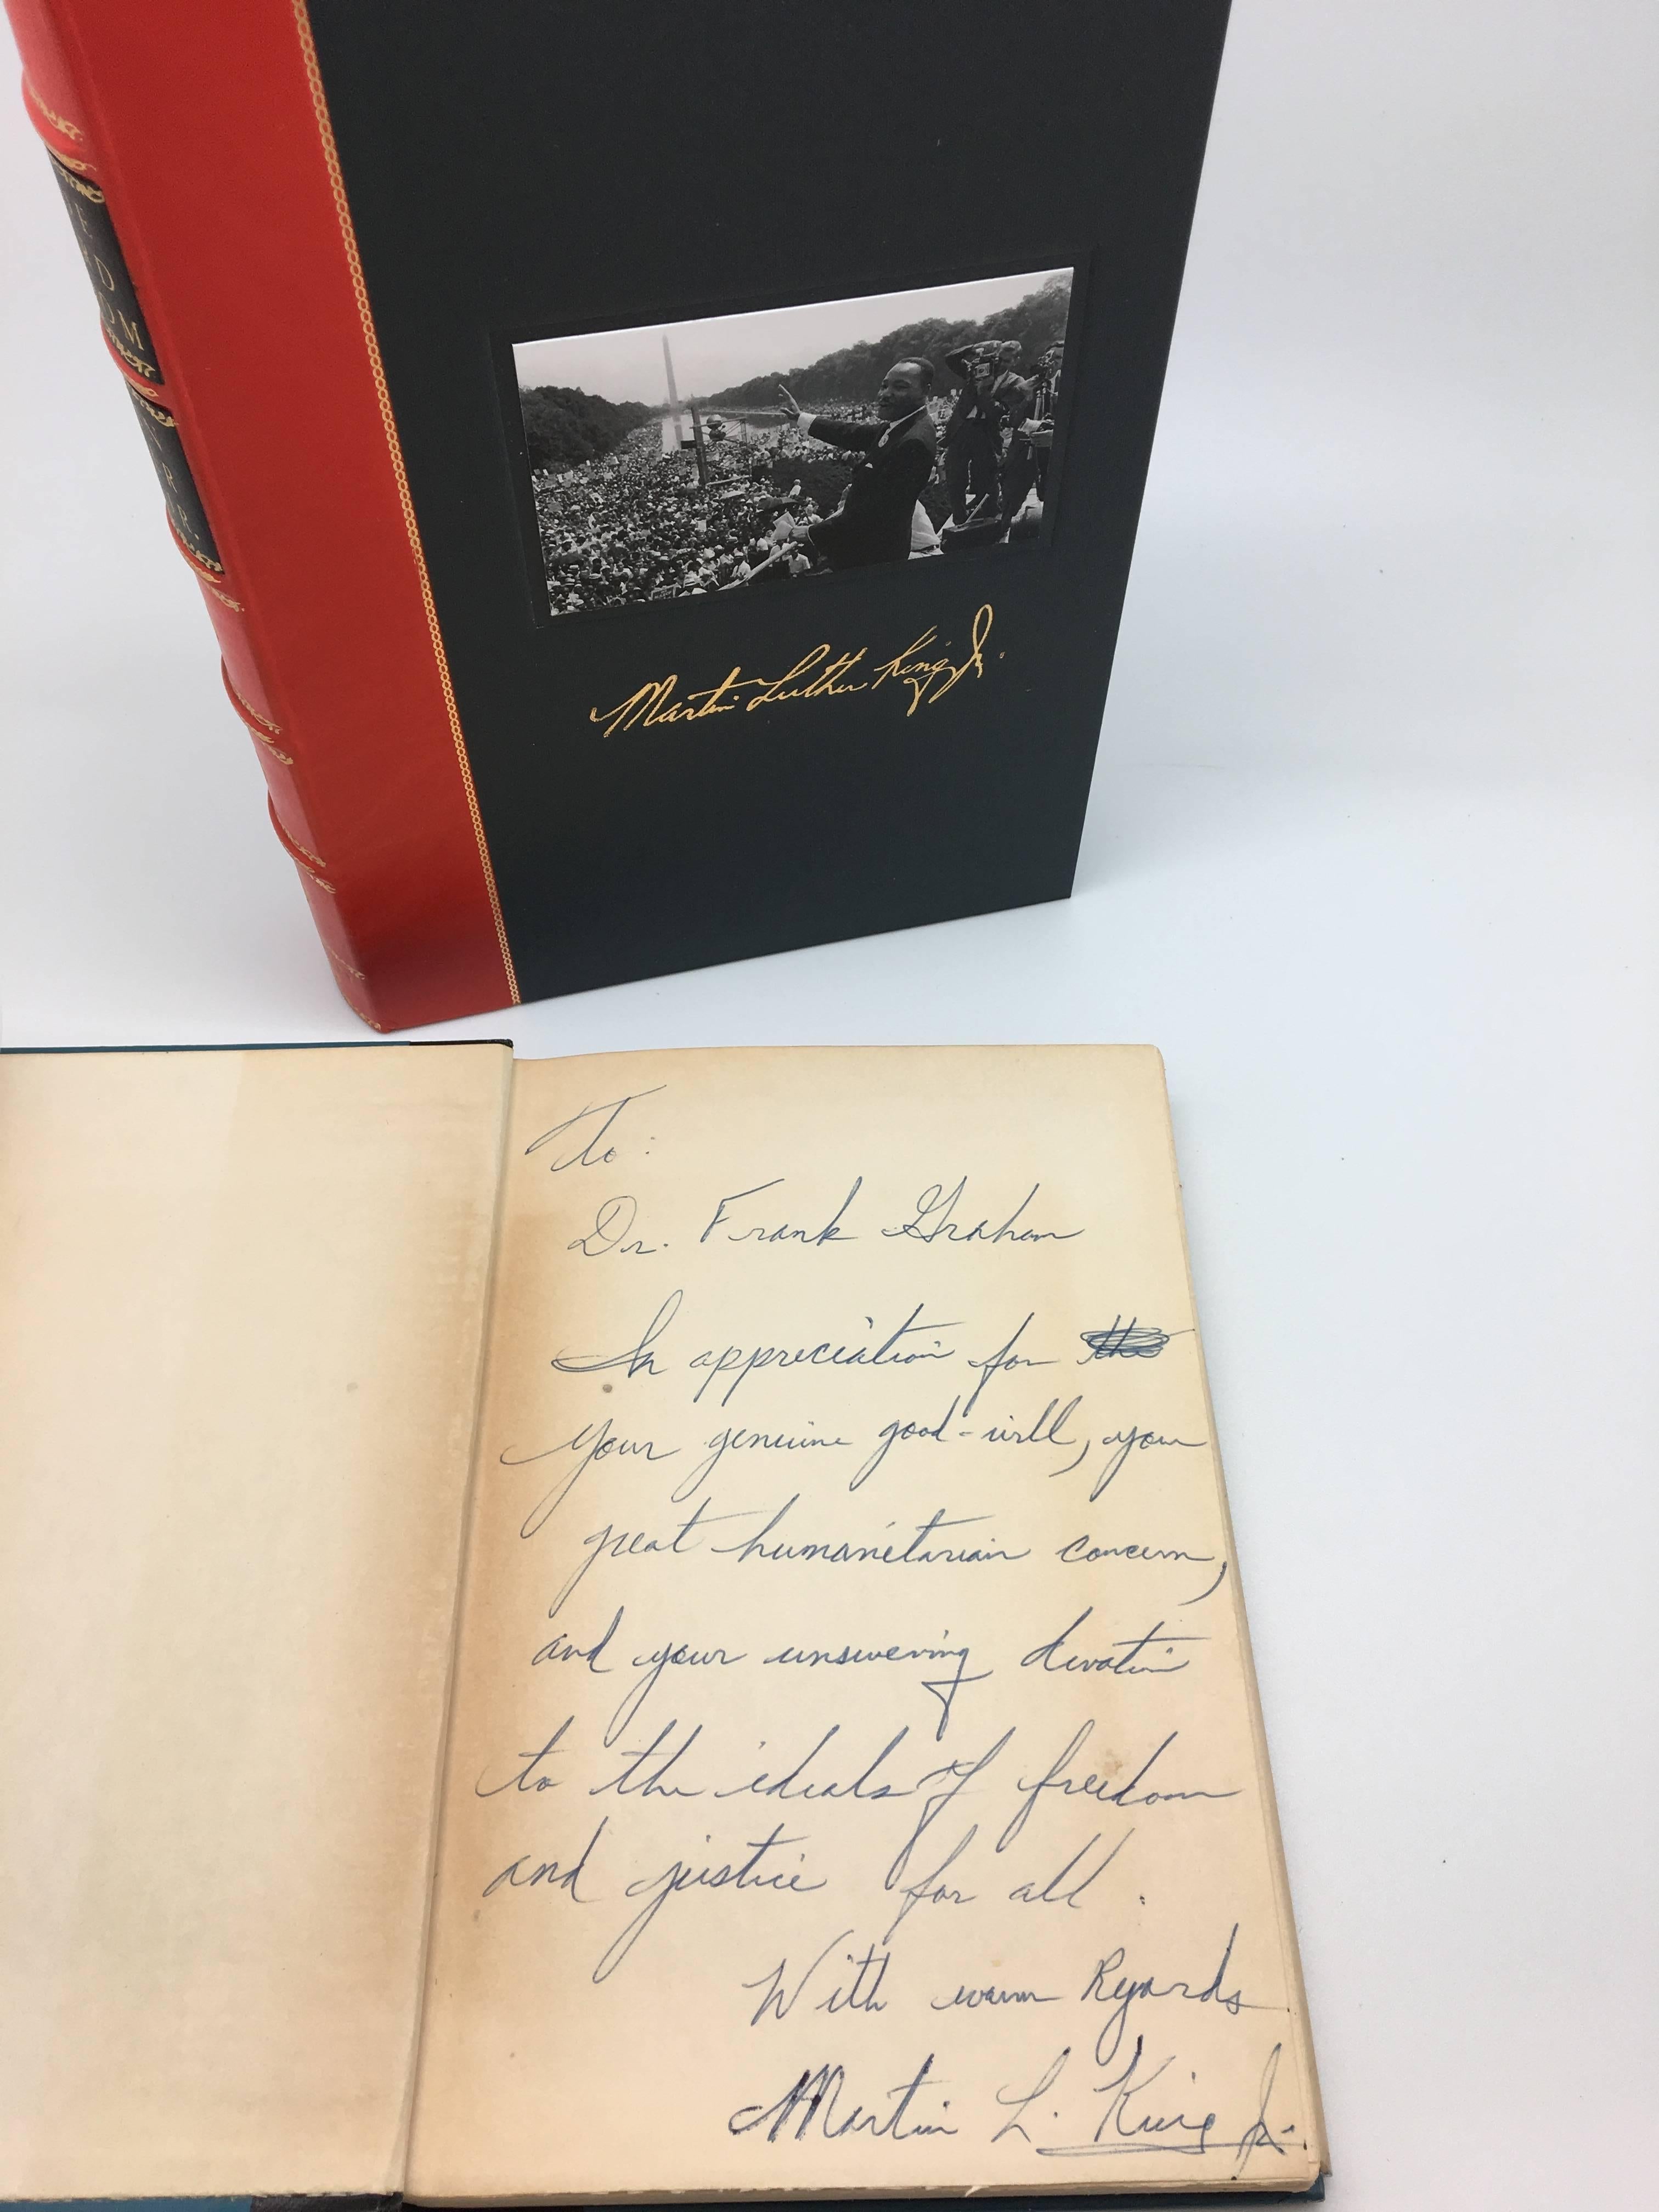 King Jr., Martin Luther. Stride Toward Freedom: The Montgomery Story. New York: Harper and Brothers, 1958. Signed and inscribed first edition. Octavo, original red and blue dust jacket. Housed in matching quarter leather clamshell.

Dr. Martin